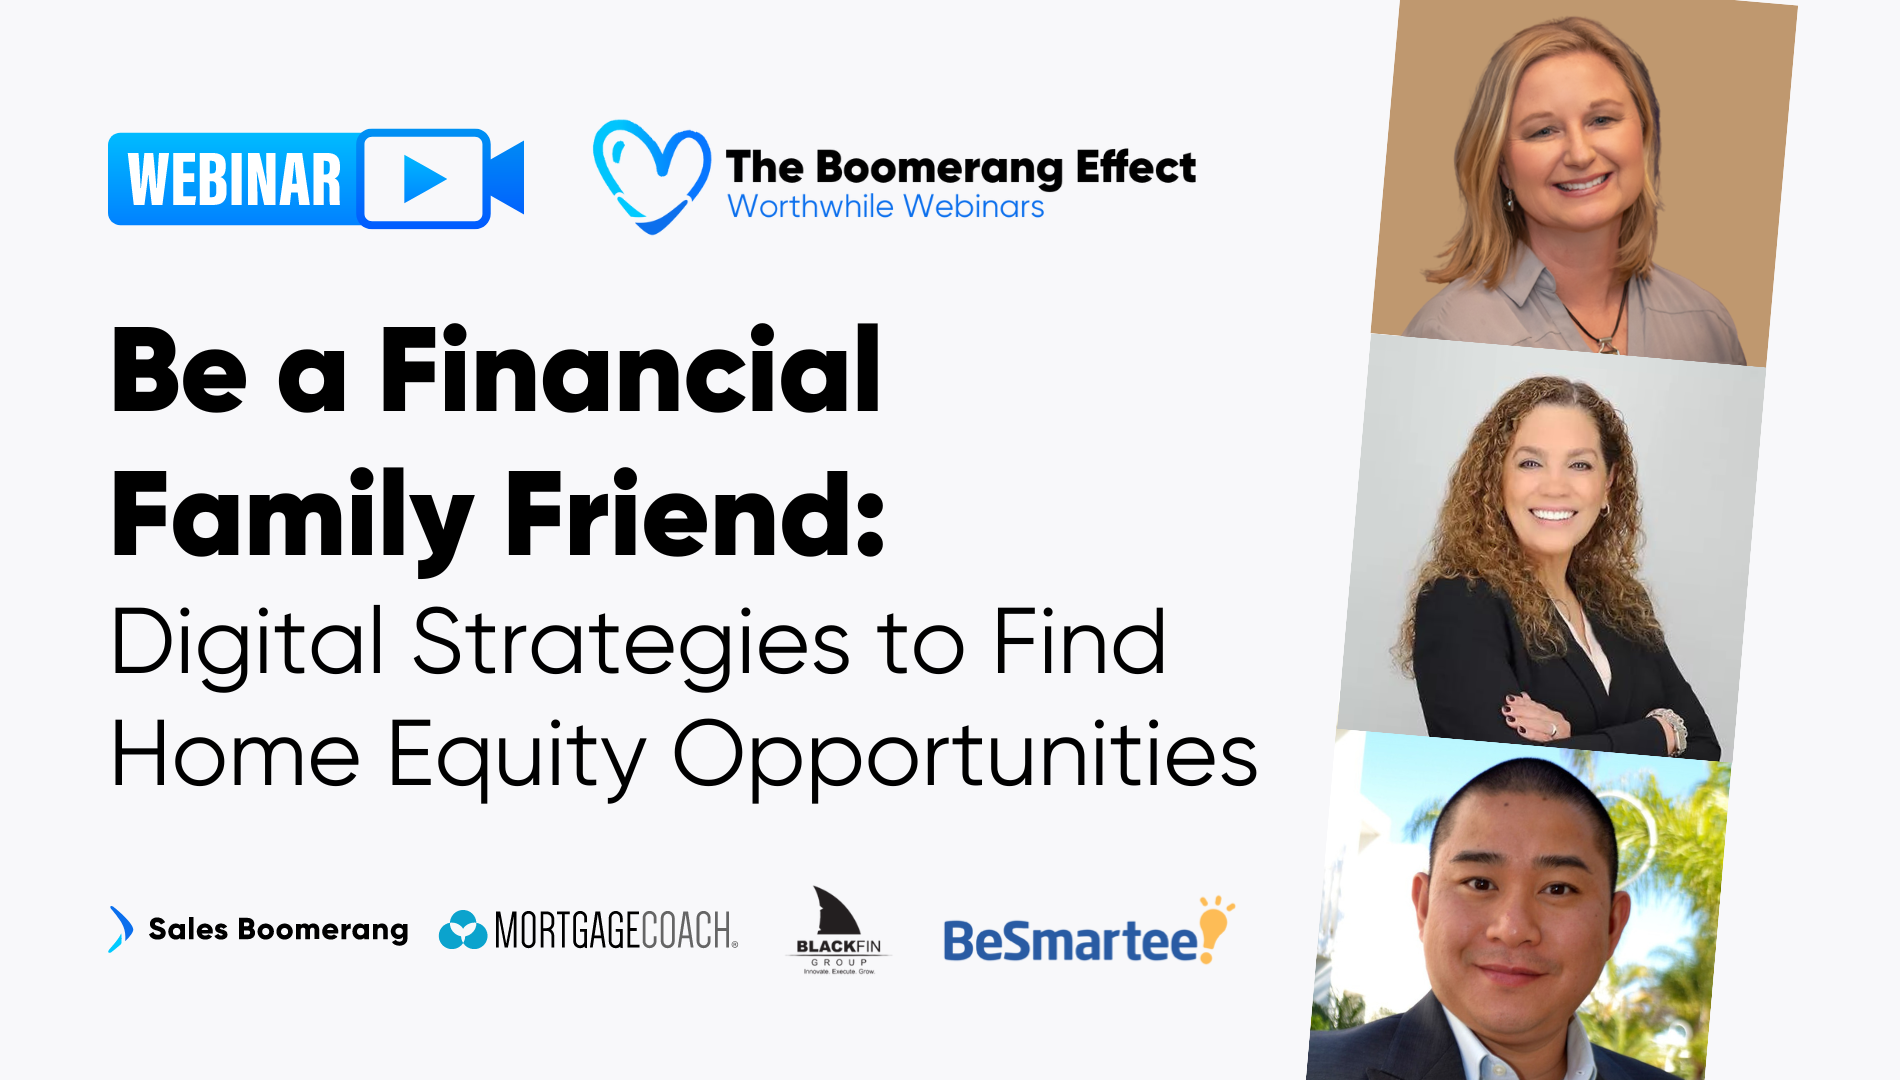 Be a Financial Family Friend: Digital Strategies to Find Home Equity Opportunities